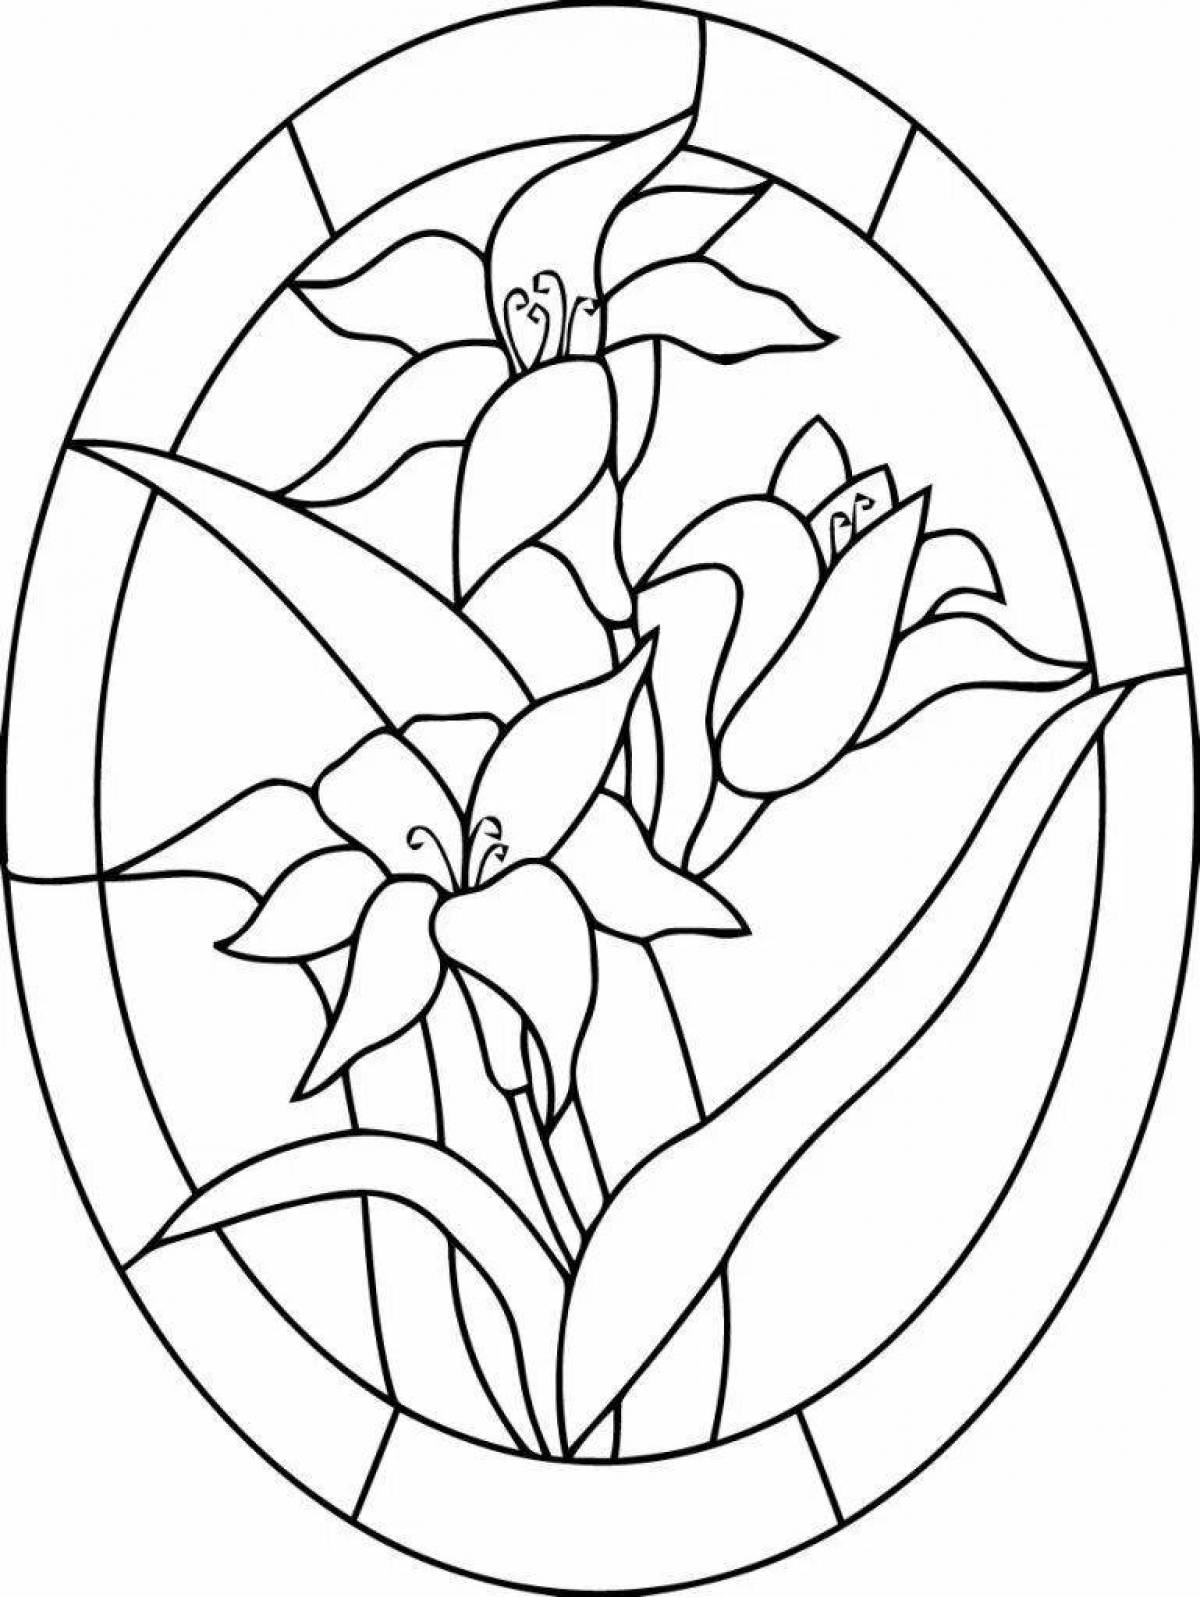 Joyful stained glass coloring page